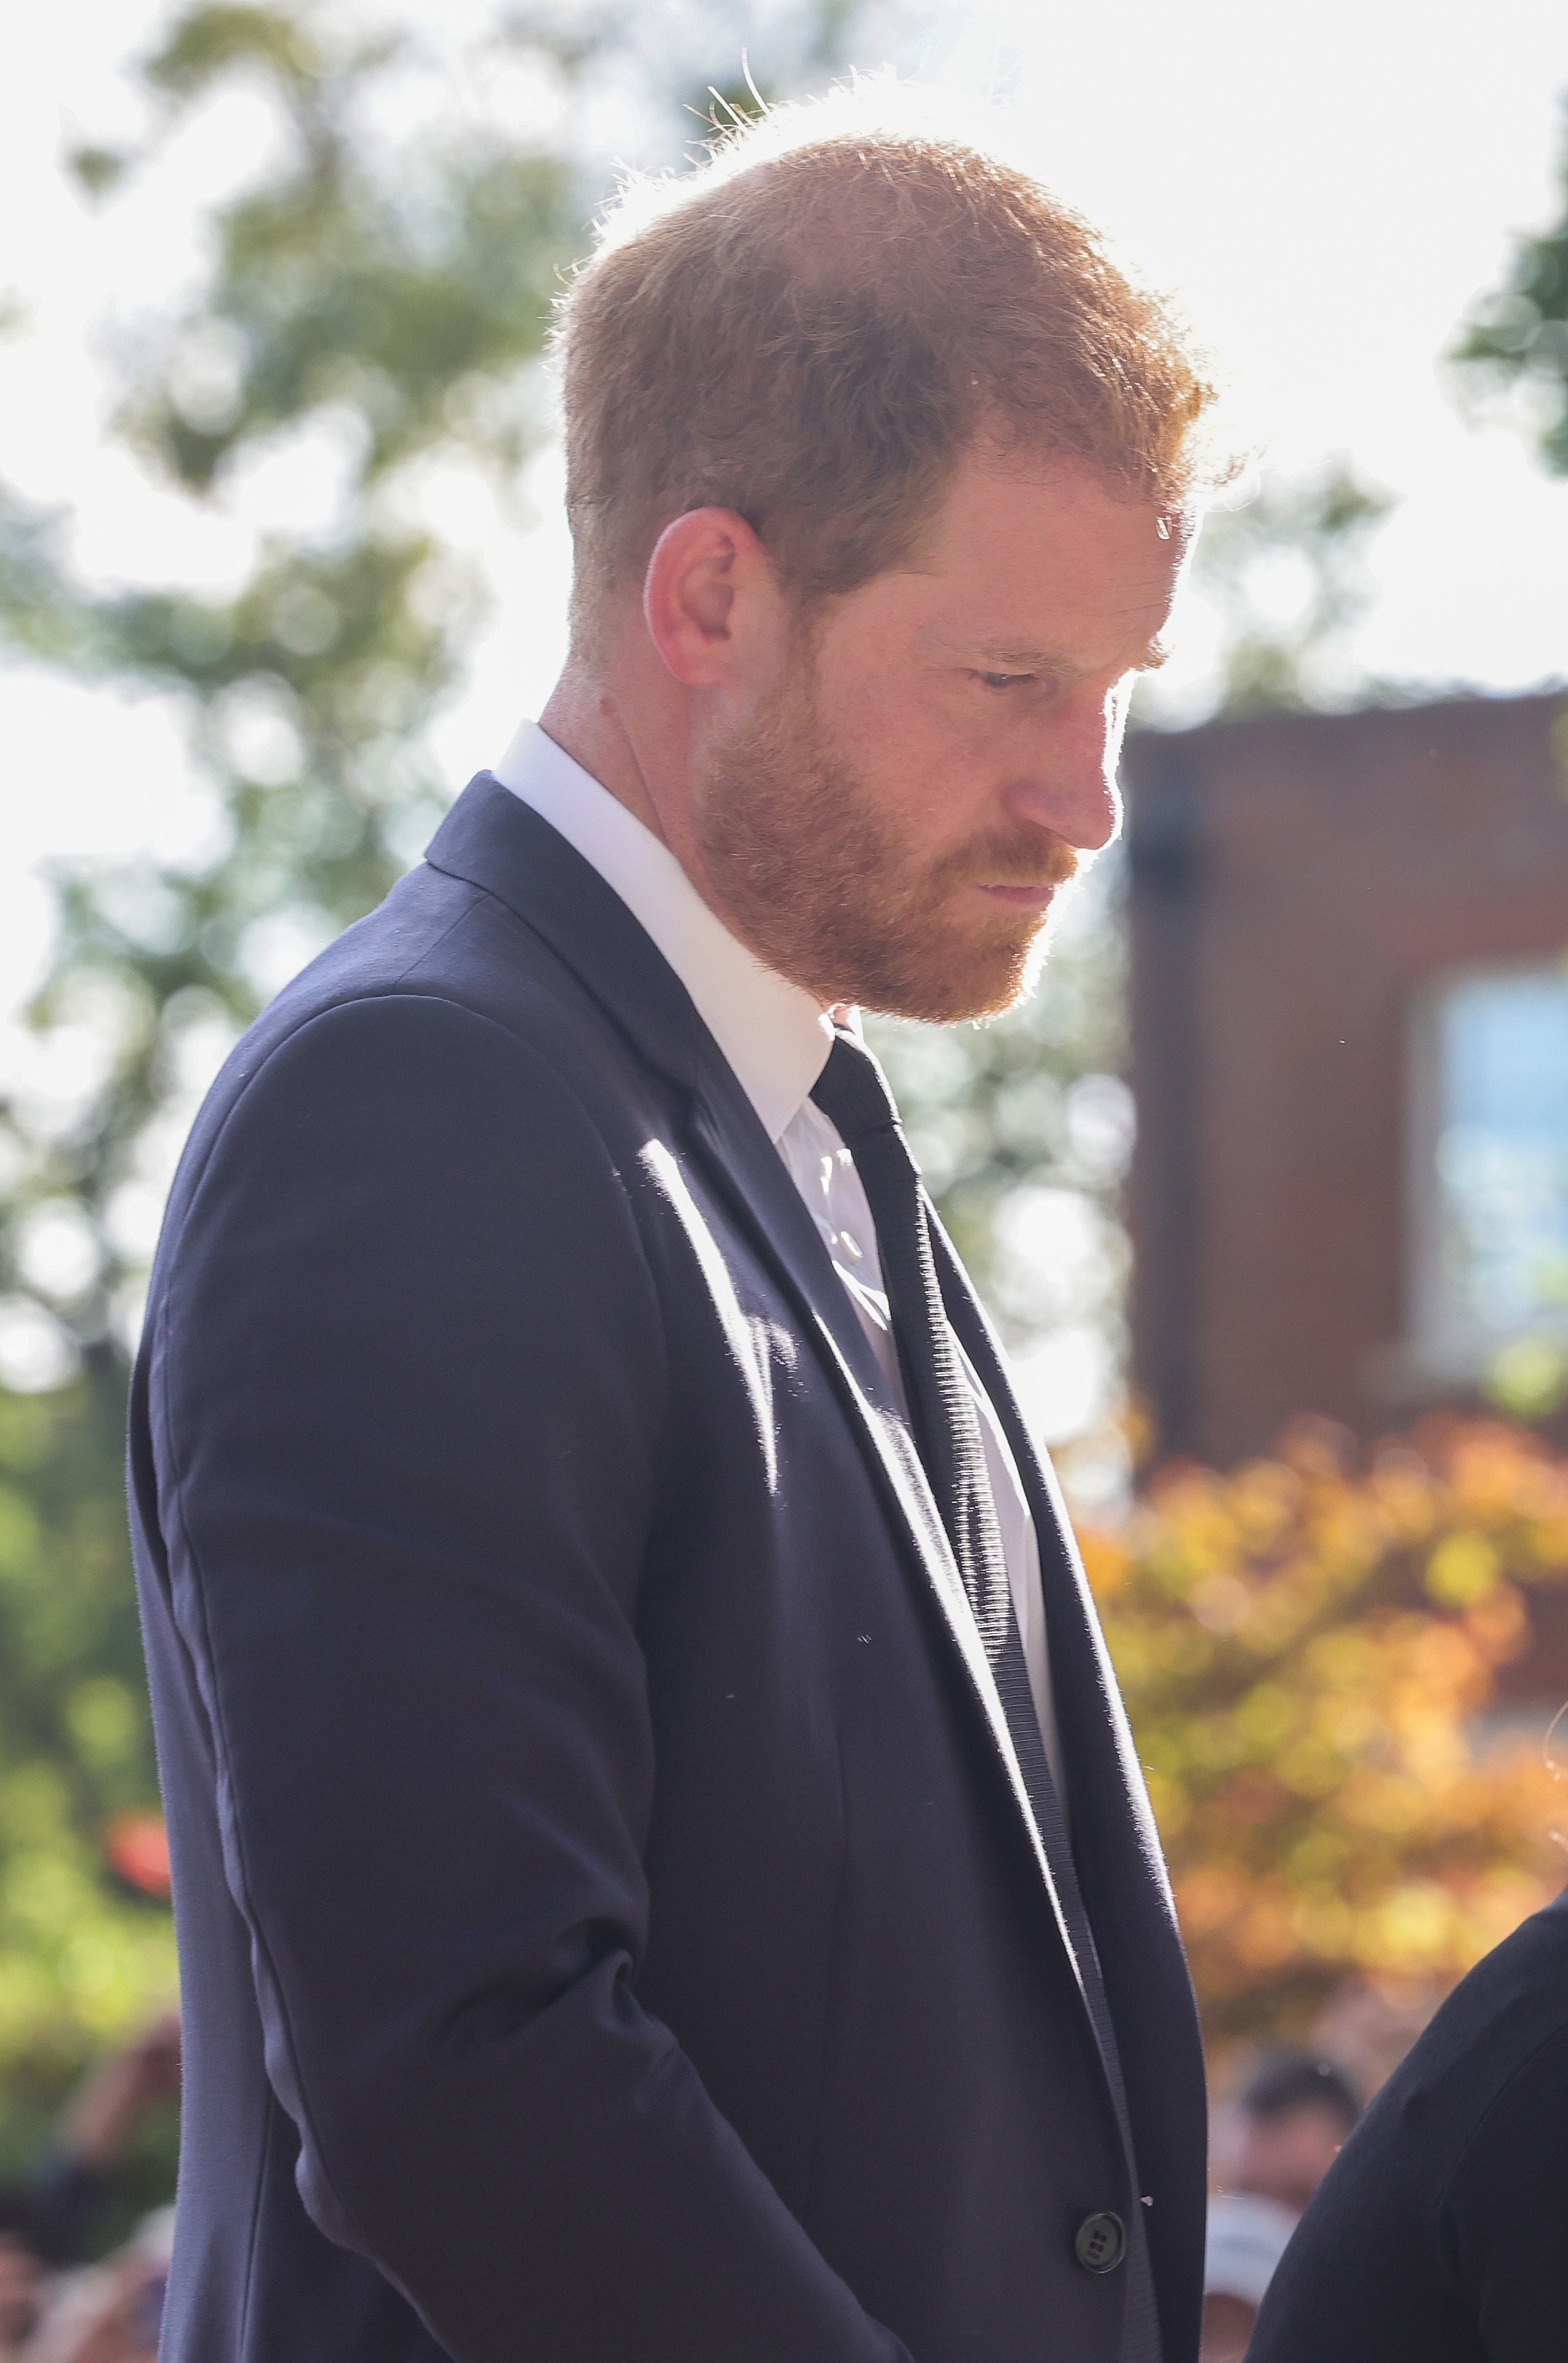 The Duke of Sussex viewing the messages and floral tributes left by members of the public at Windsor Castle in Berkshire following the death of Queen Elizabeth II (PA)